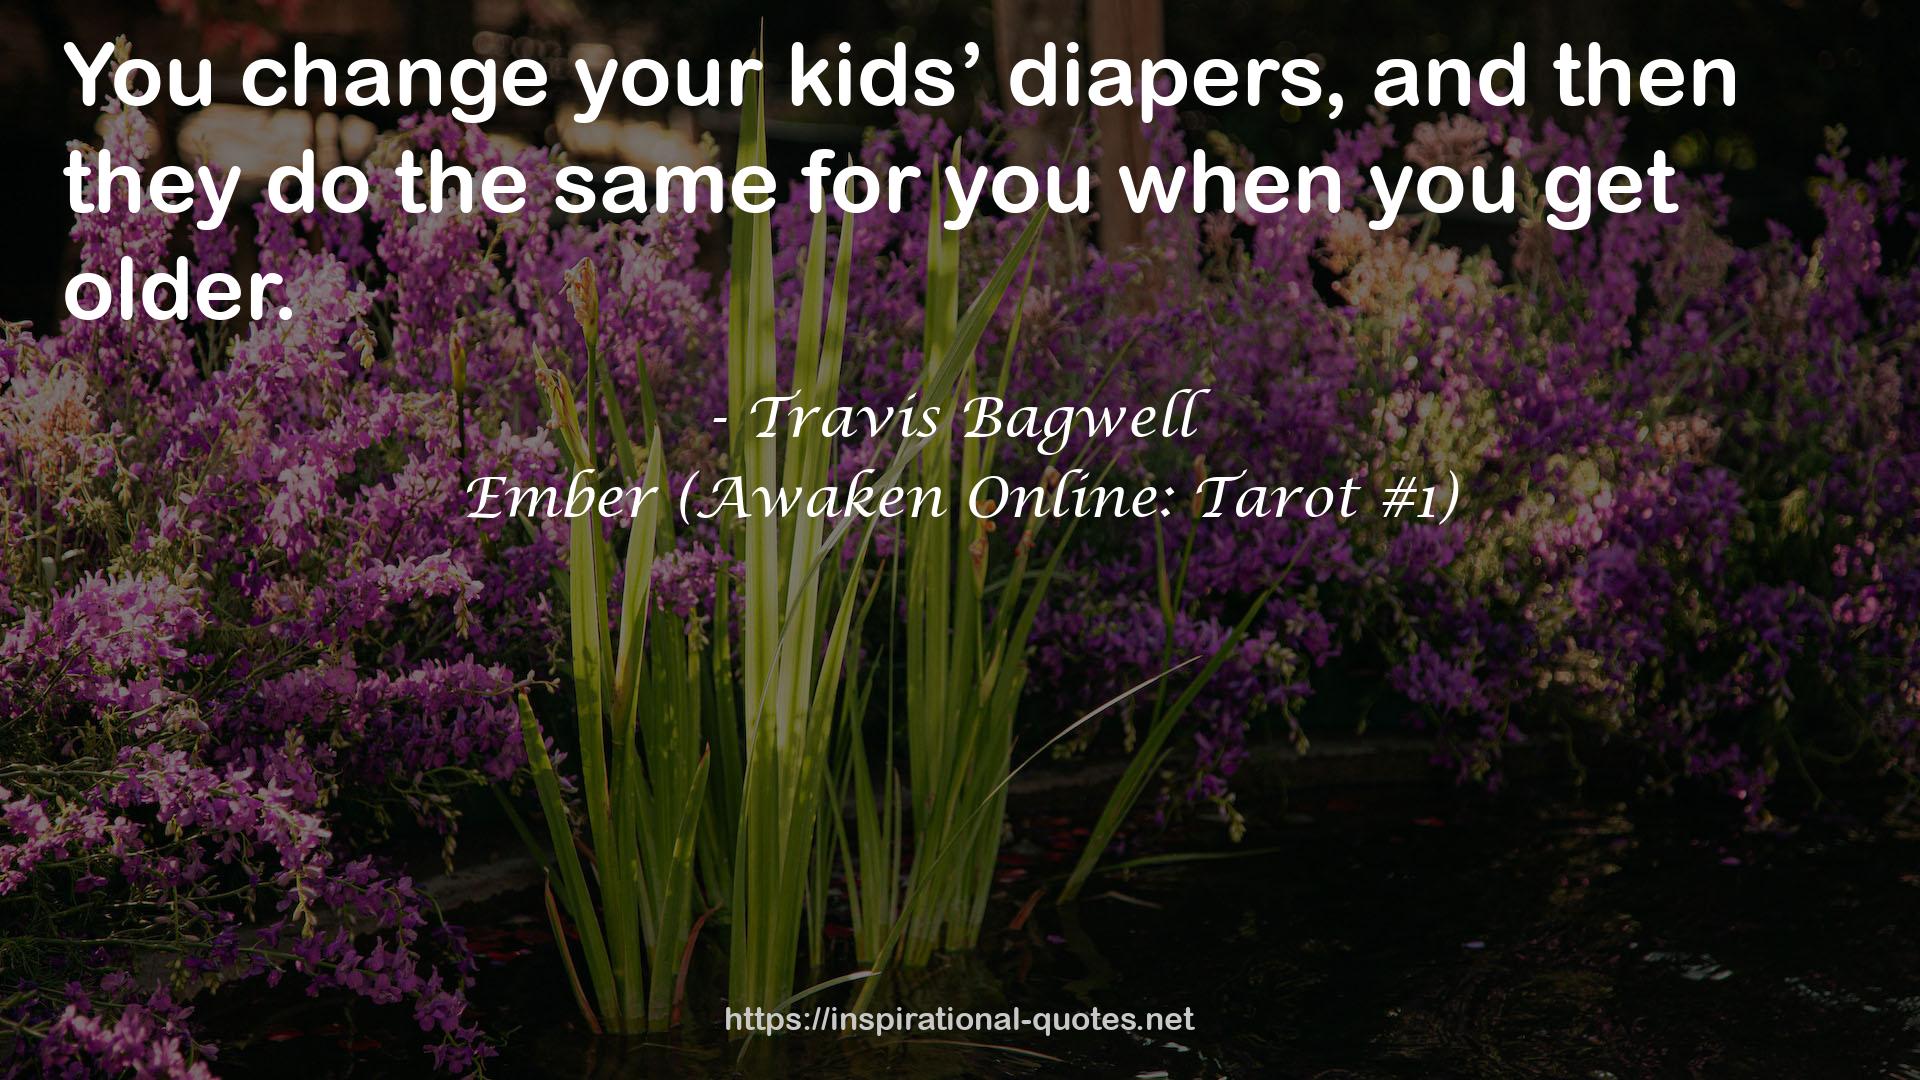 Travis Bagwell QUOTES